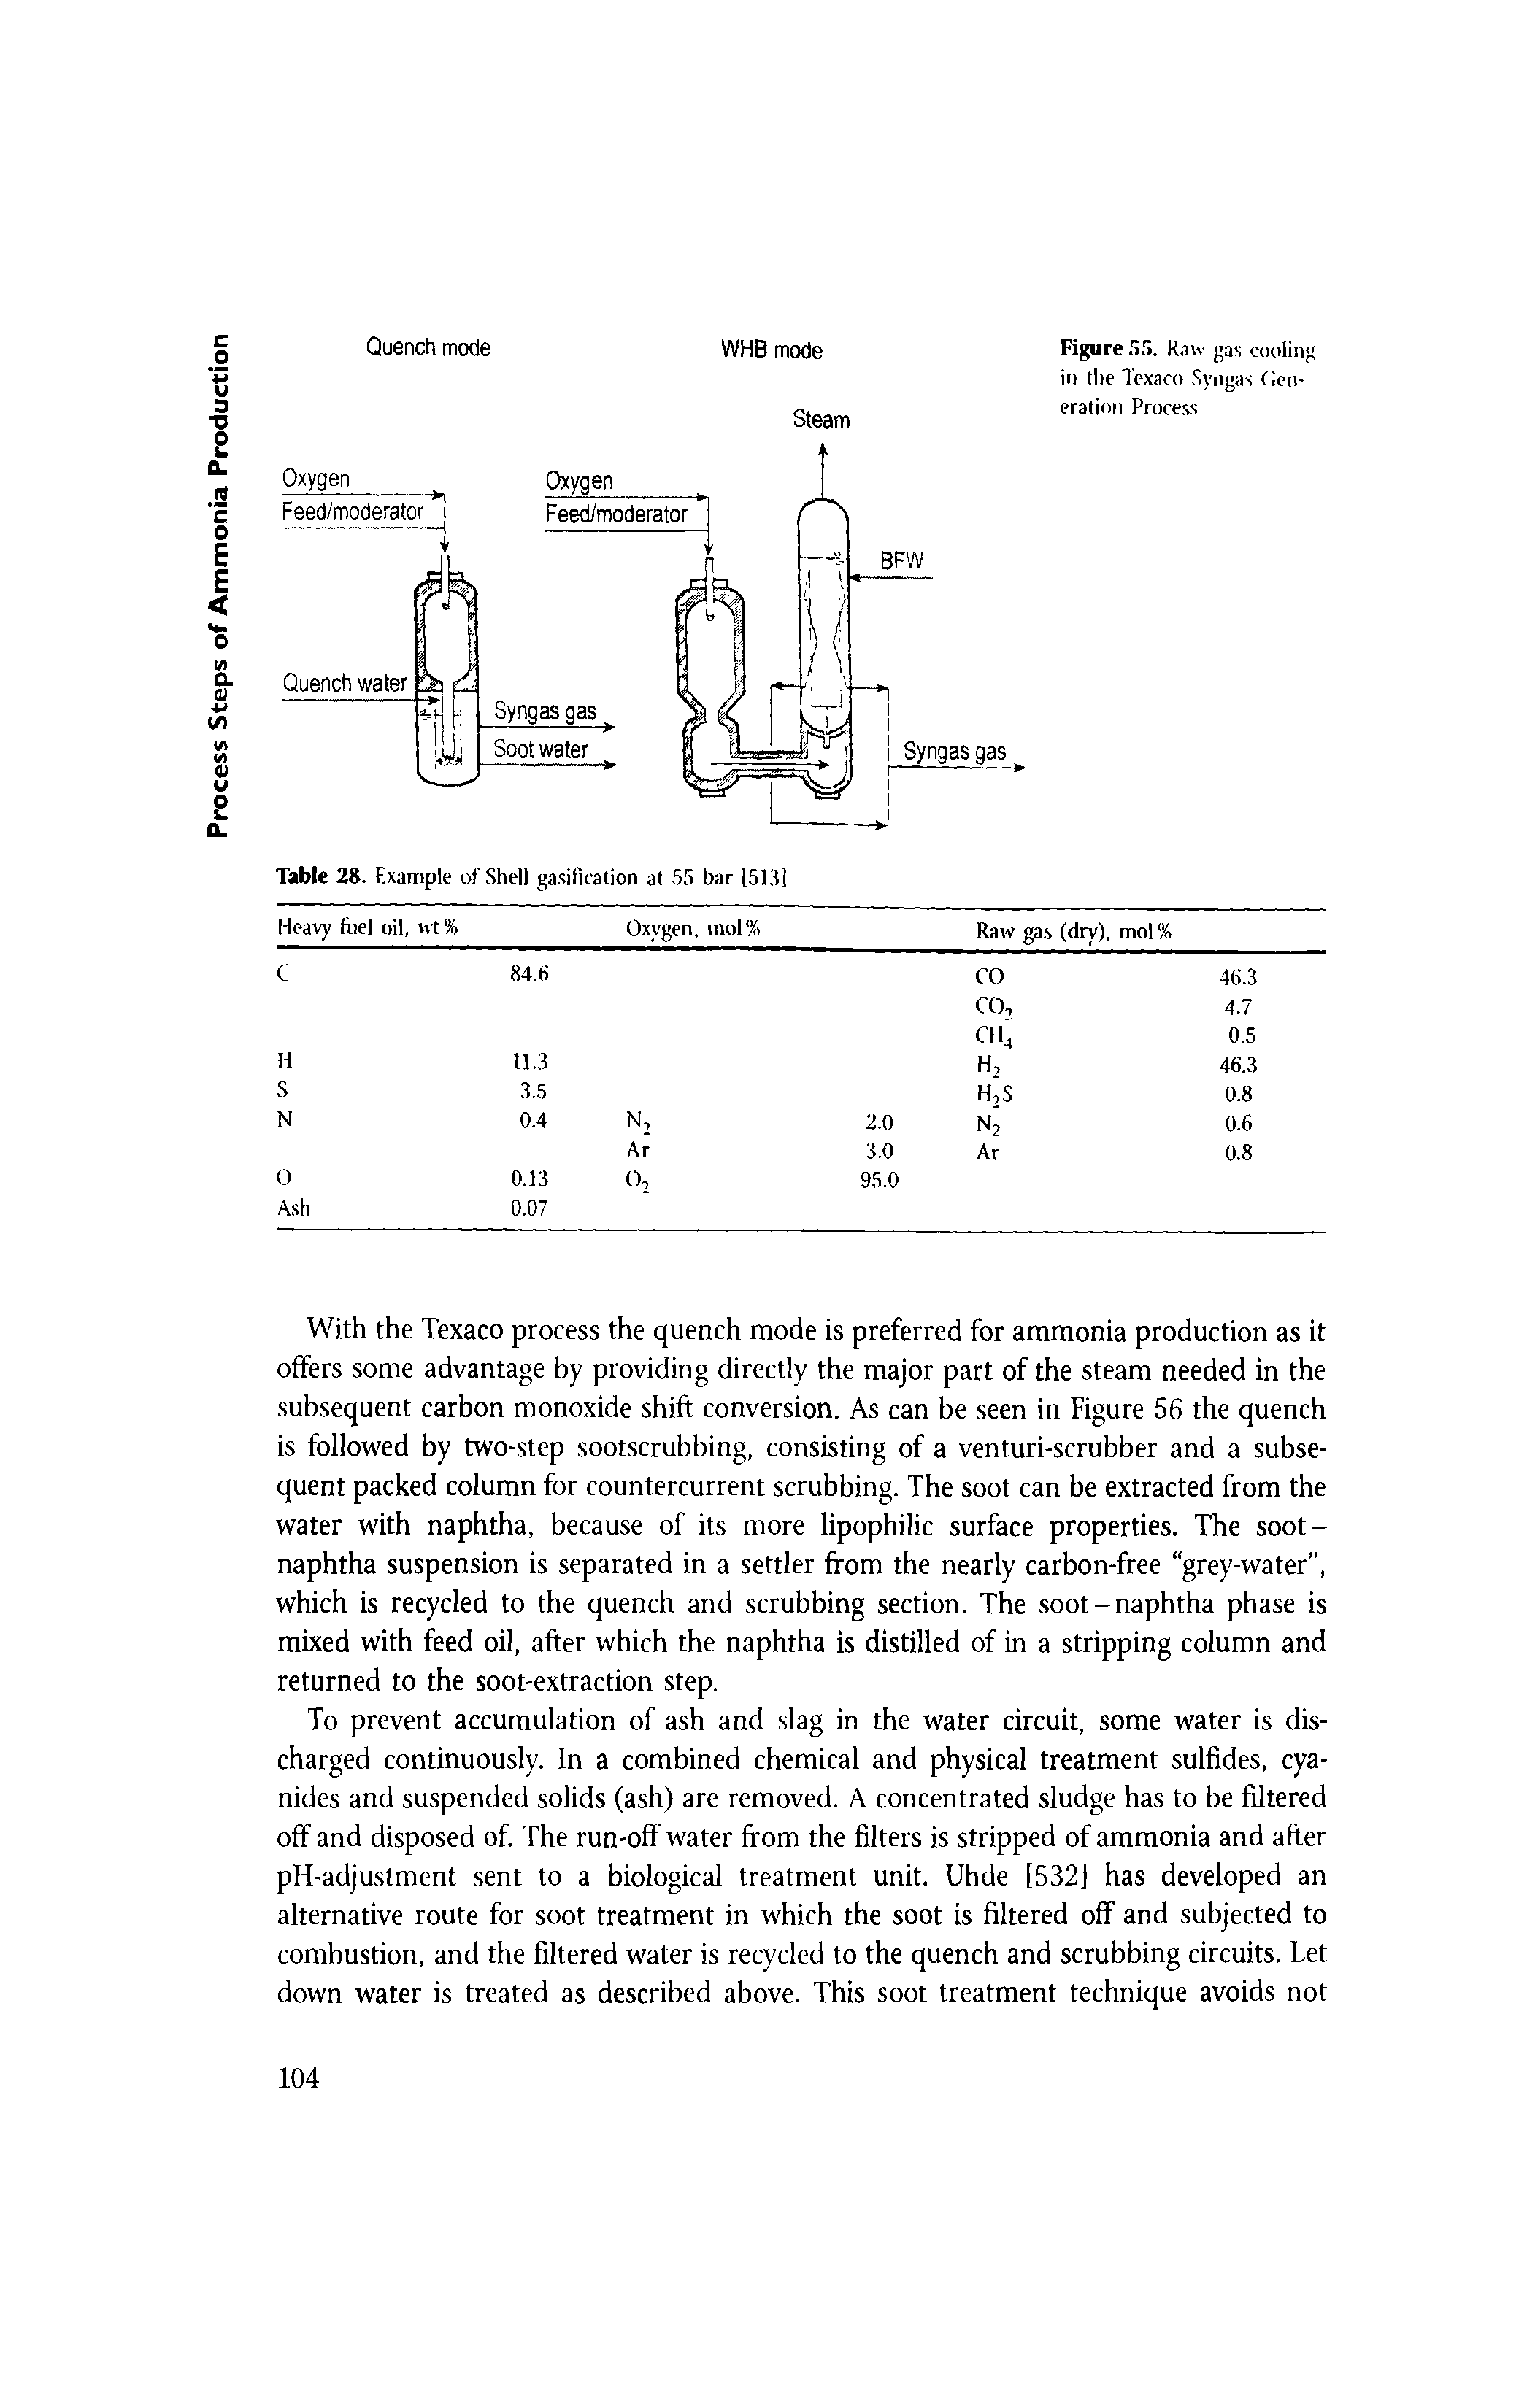 Figure 55. Raw gas cooling in the Texaco Syngas Generation Process...